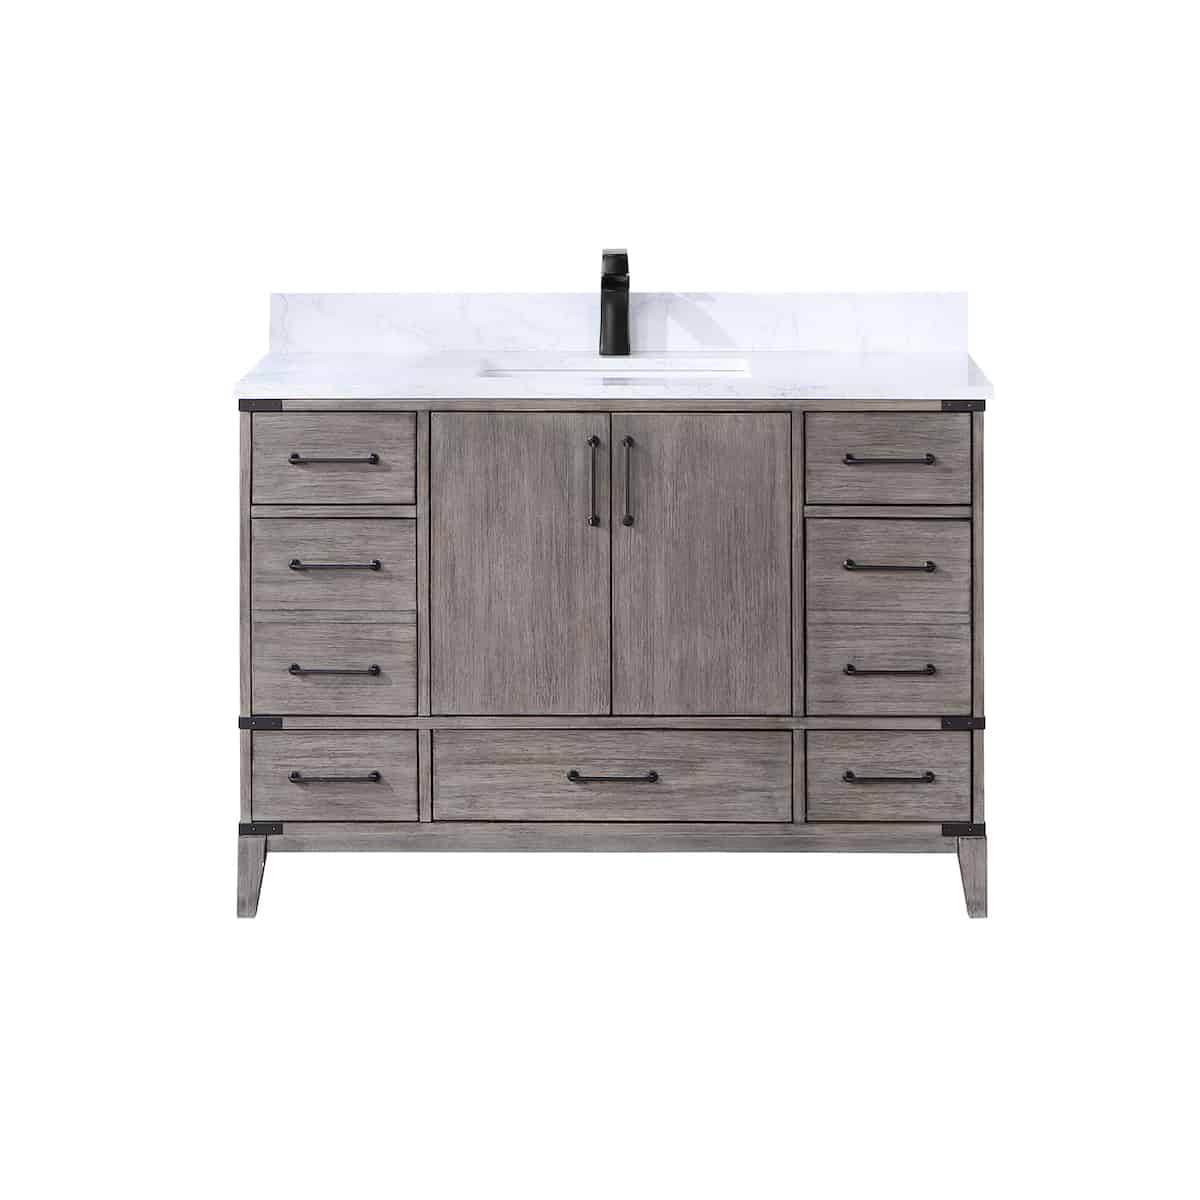 Vinnova Zaragoza 48 Inch Freestanding Single Sink Bath Vanity in Classical Grey with White Composite Grain Stone Countertop Without Mirror 799048-CR-GW-NM